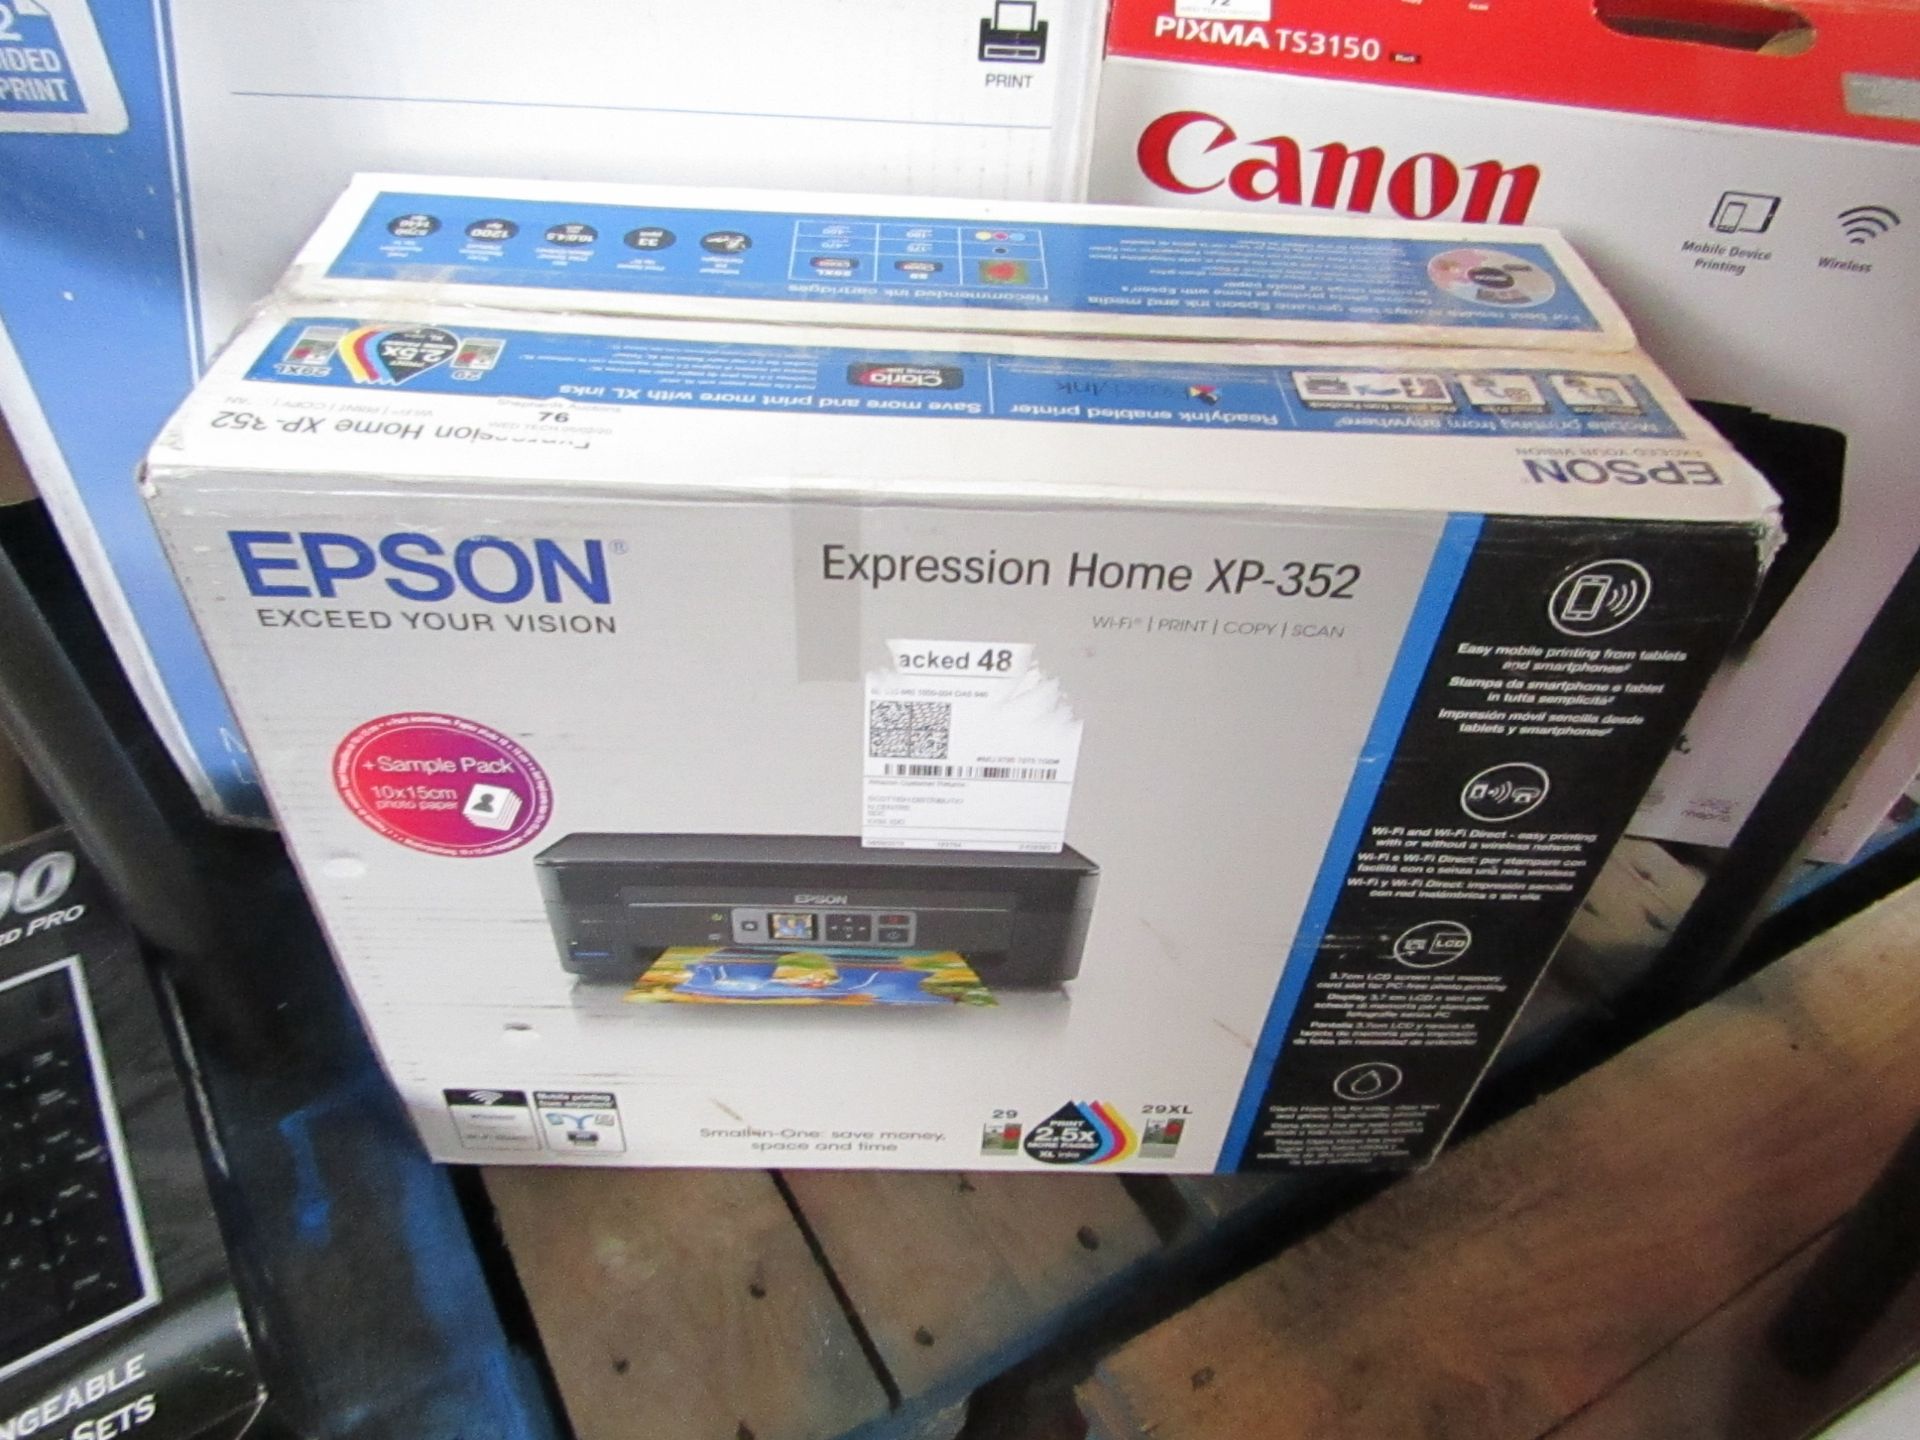 Epson Expression Home XP-352 multi-functional printer, untested and boxed.